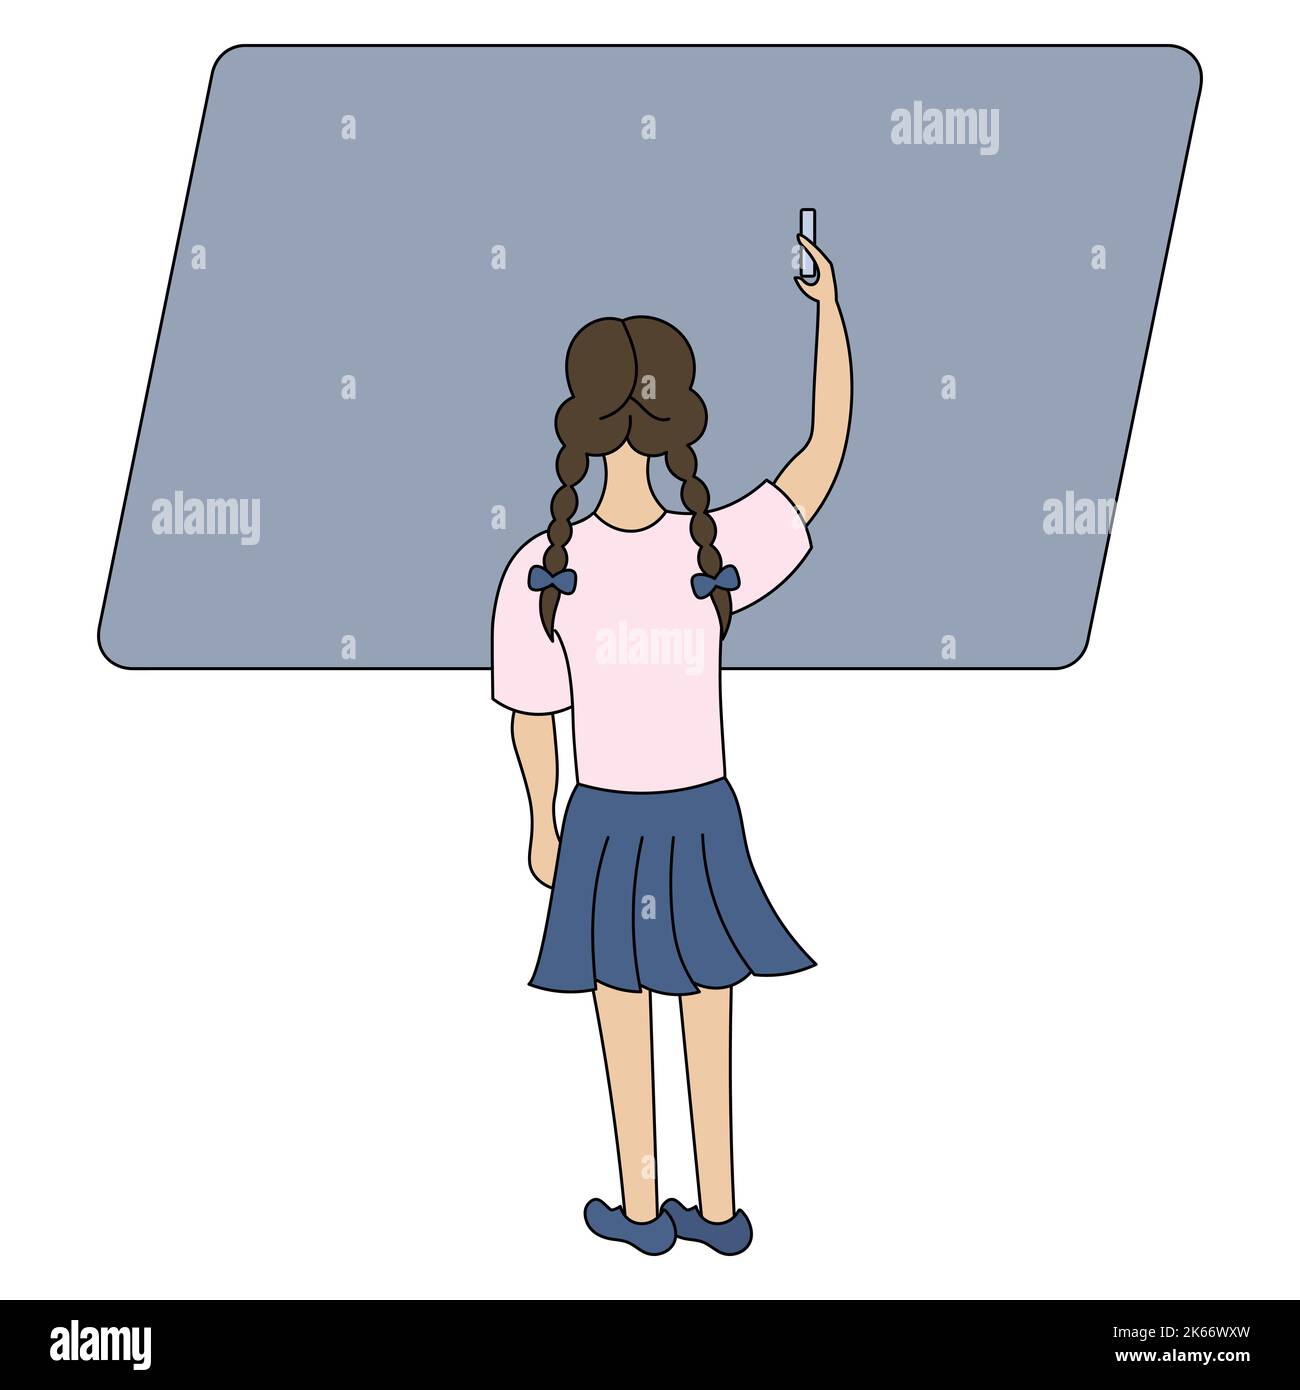 The schoolgirl writes on the blackboard with chalk. Color vector illustration. Brunette girl with pigtails view from the back. School theme. Stock Vector